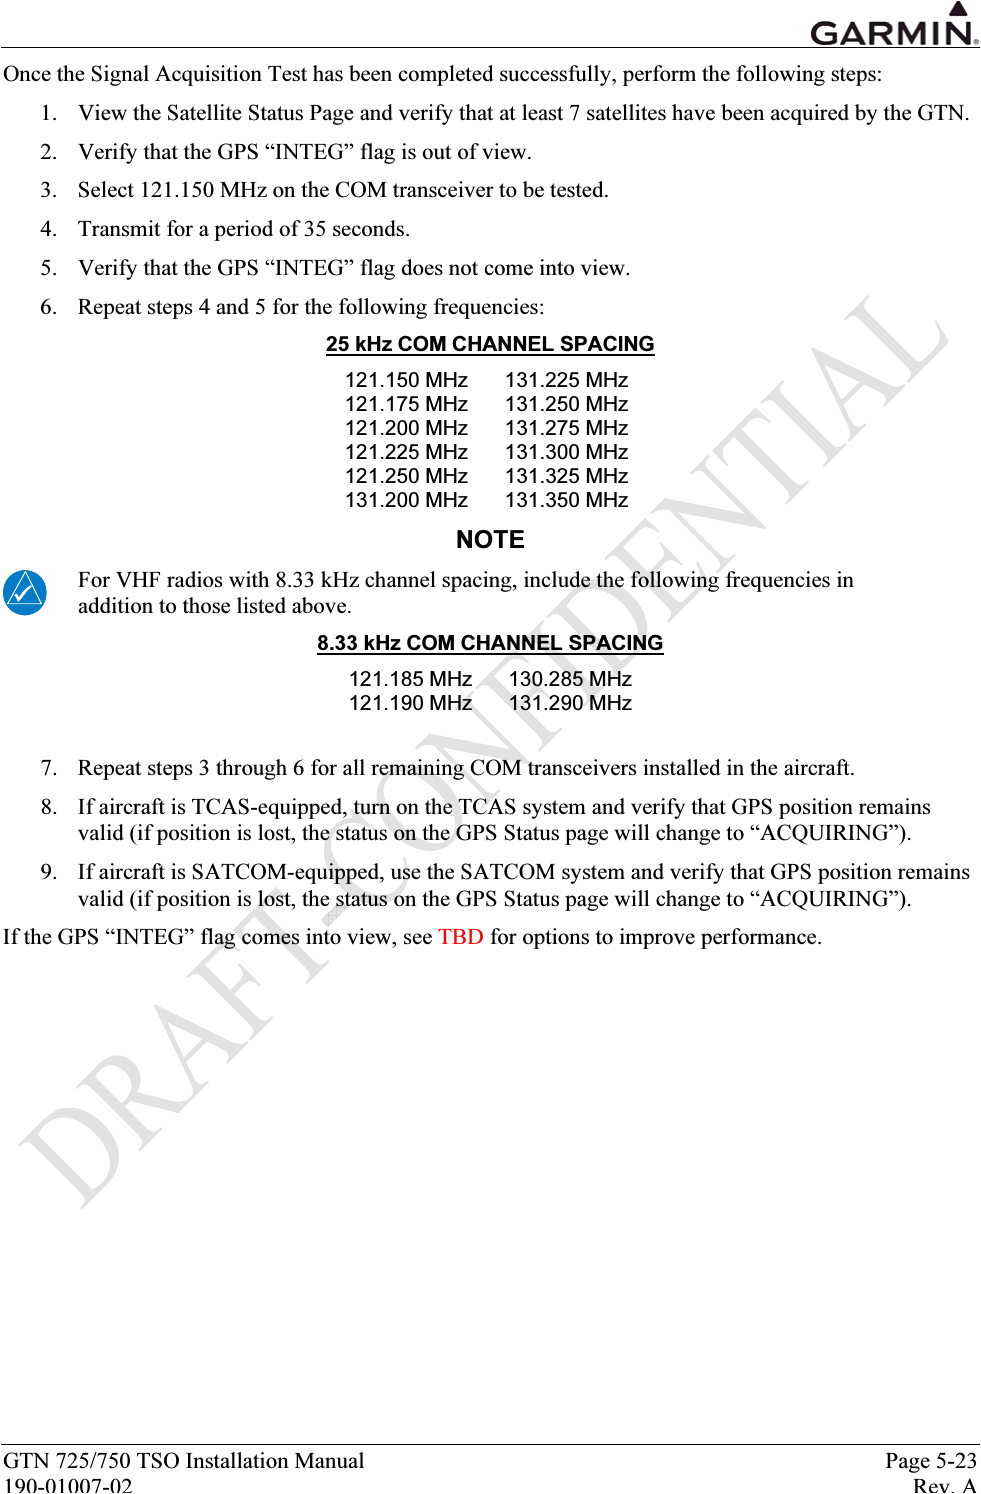 page 99 of 01594 airborne communications transceiver user manual 190 01007 02 0a garmin